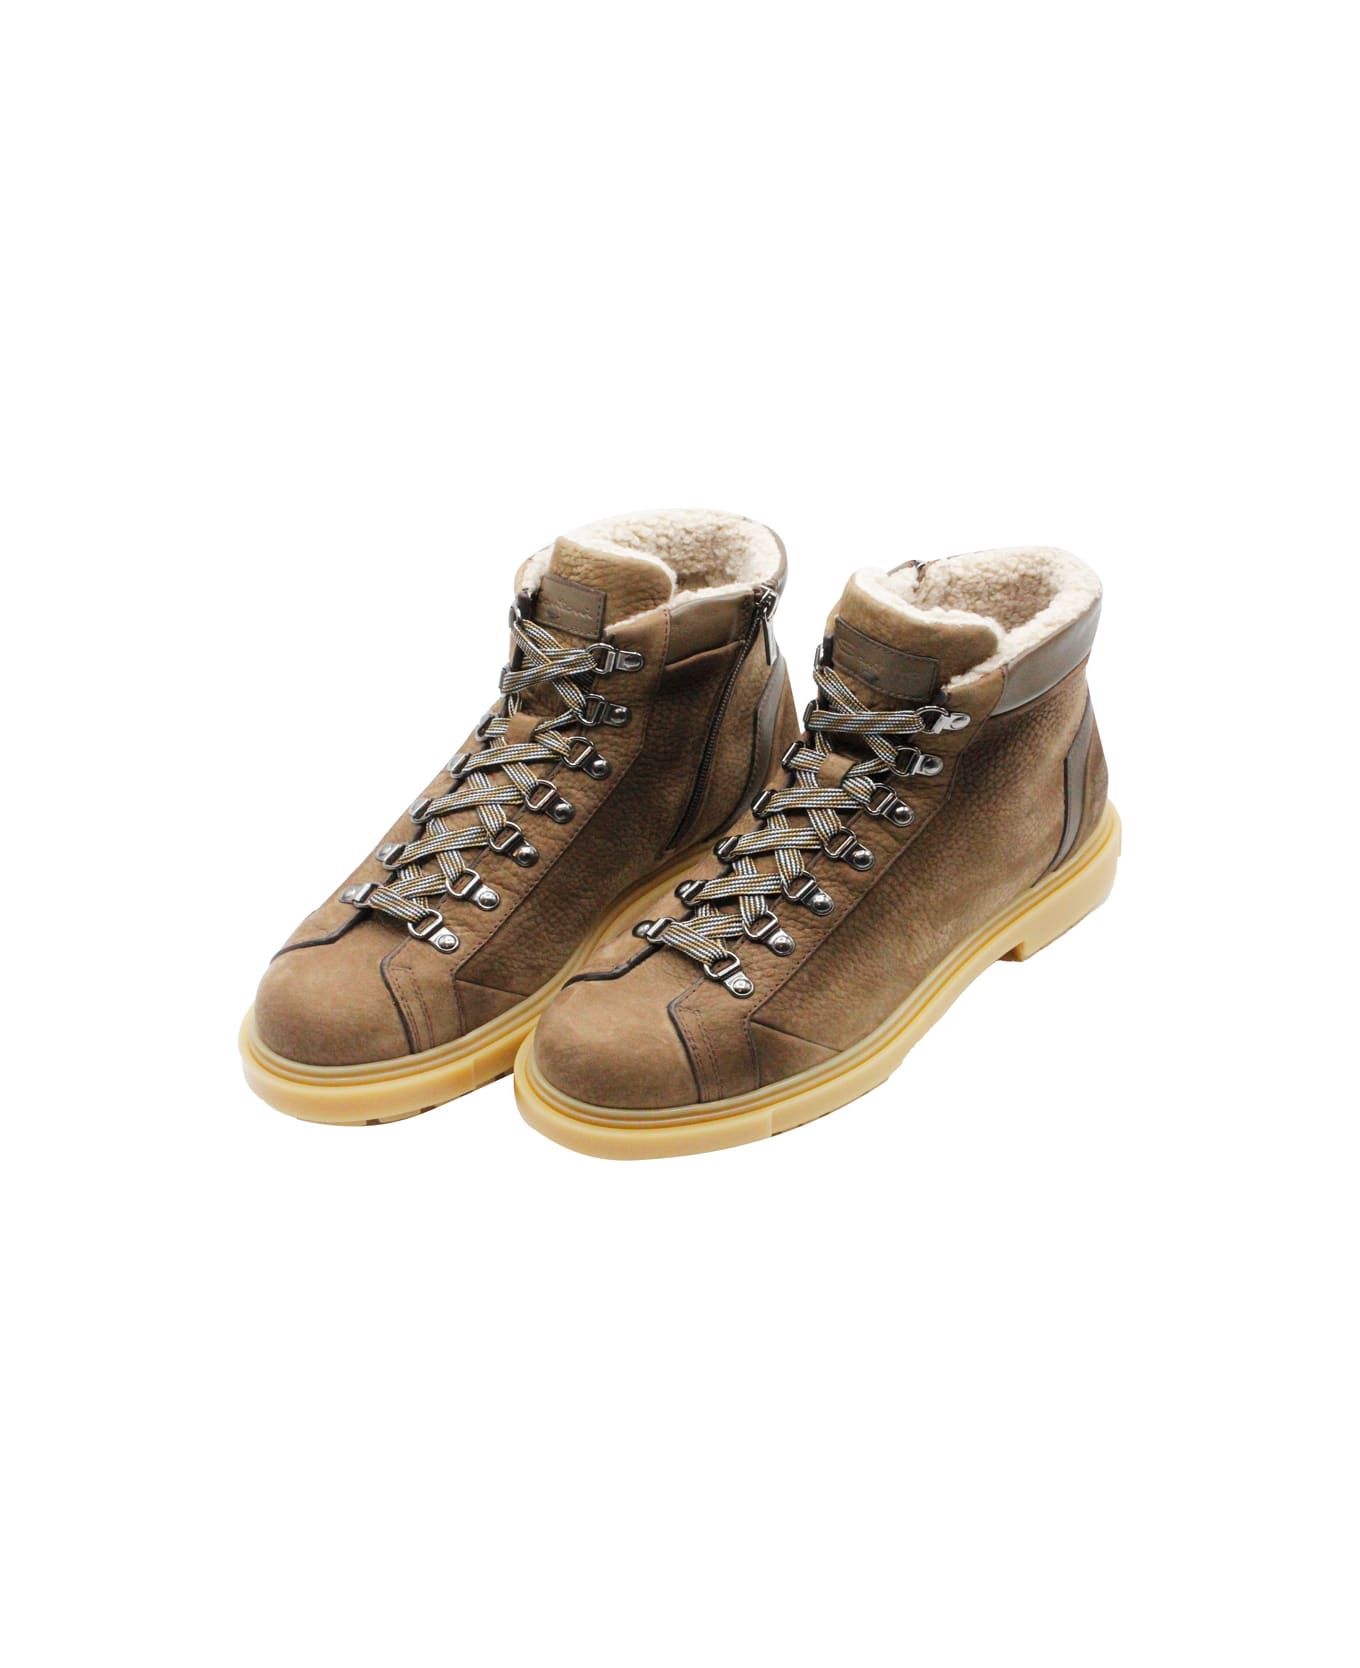 Santoni Boot In Soft Nubuck Leather With Side Zip And Laces. Internal Lamb Fur Padding. Metal Hooks - Taupe